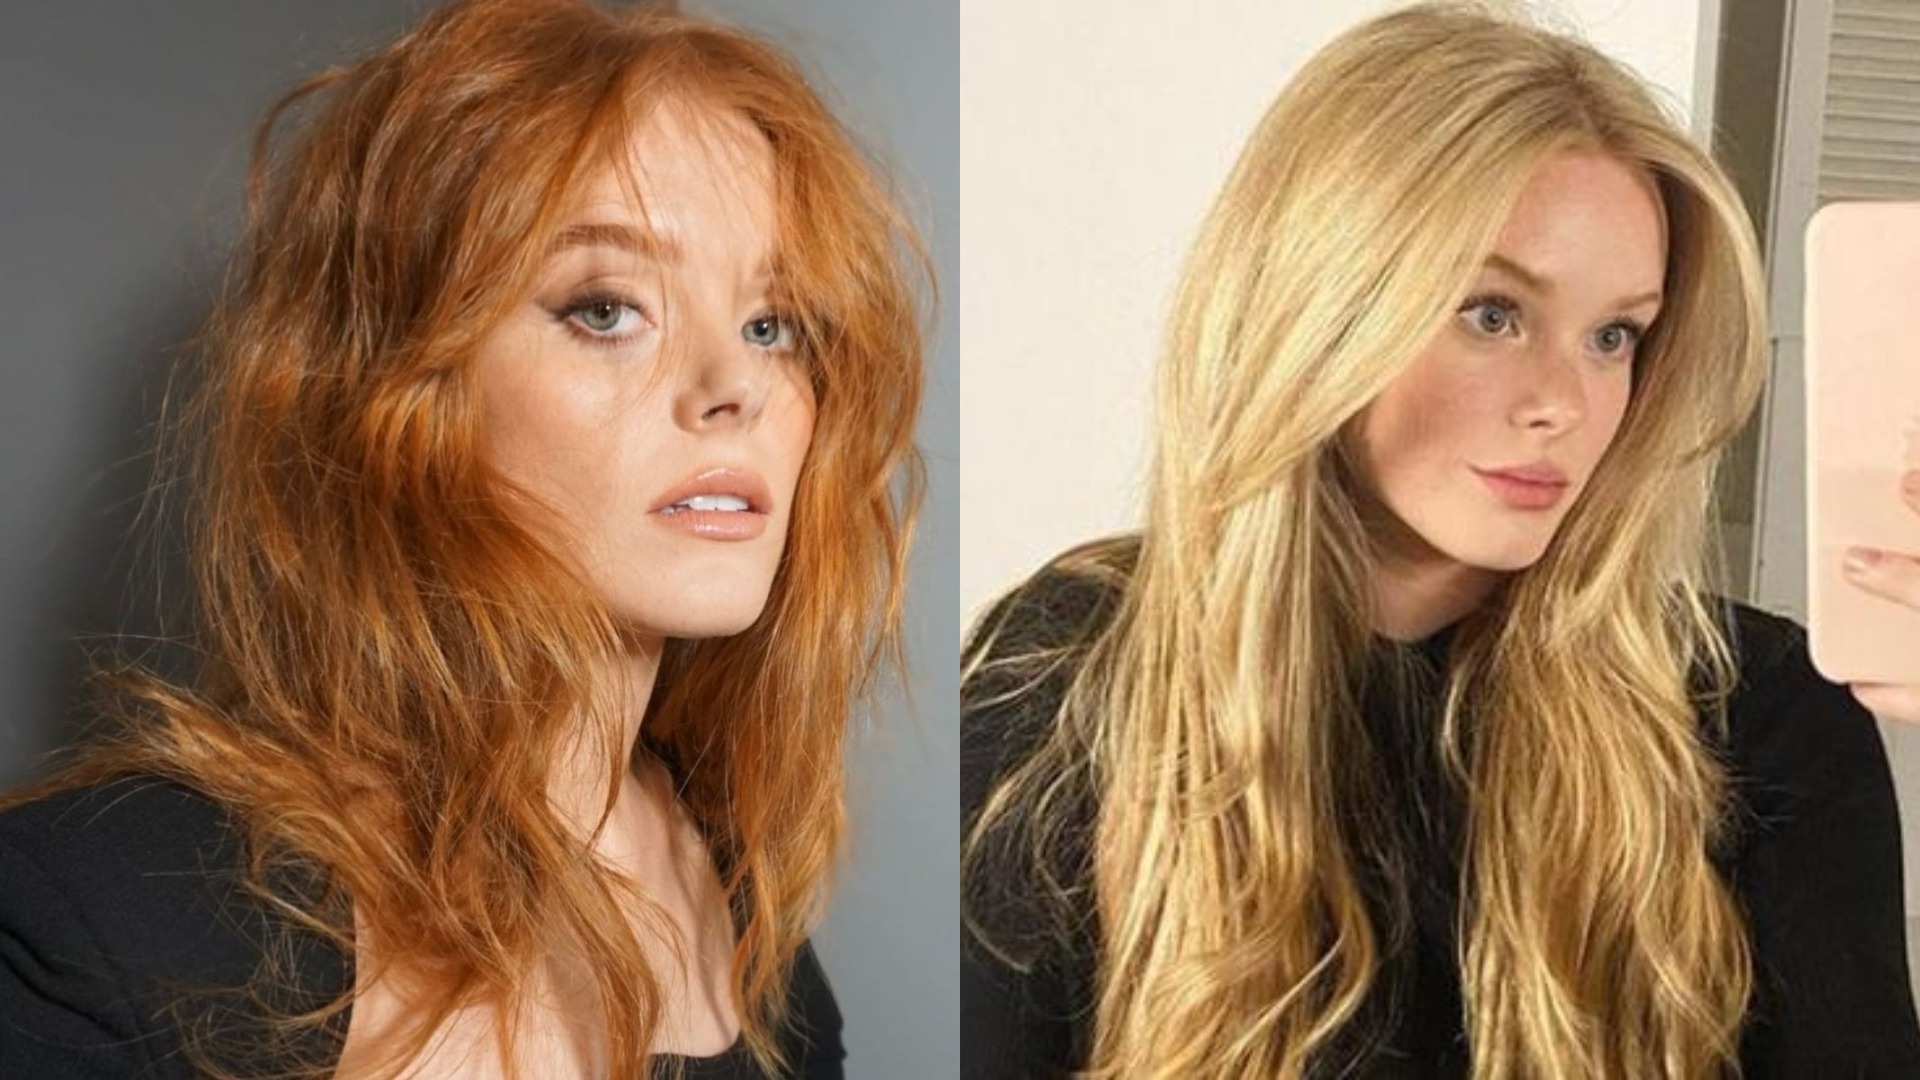 Natural Redhead Abigail Cowen Went Blonde for a Movie Role: Could You Do It?